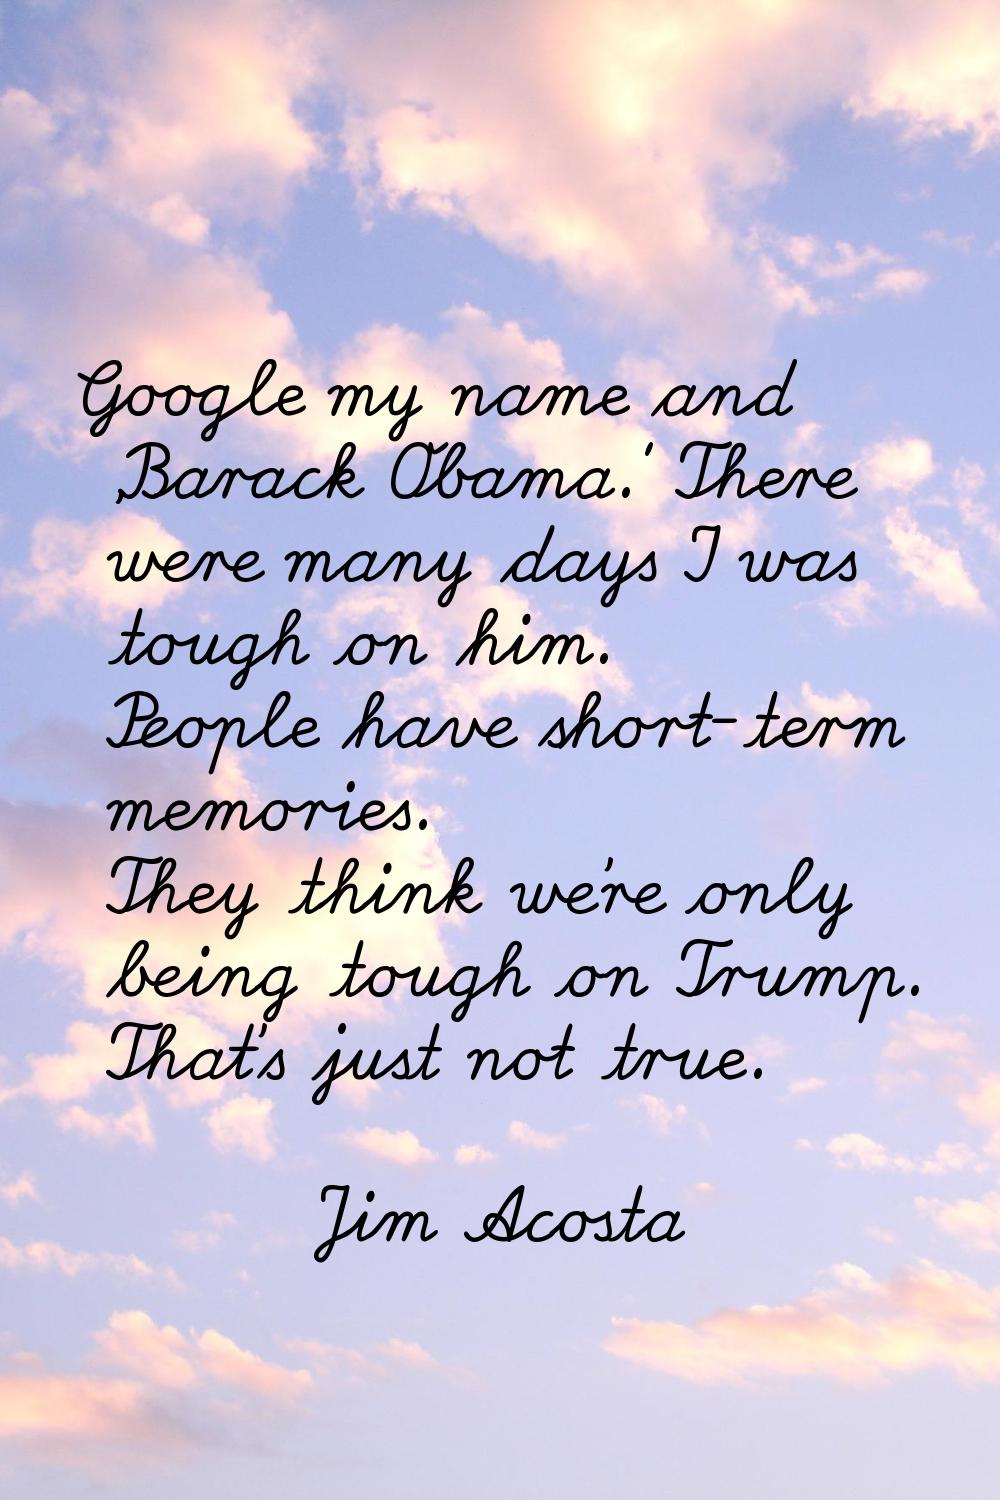 Google my name and 'Barack Obama.' There were many days I was tough on him. People have short-term 